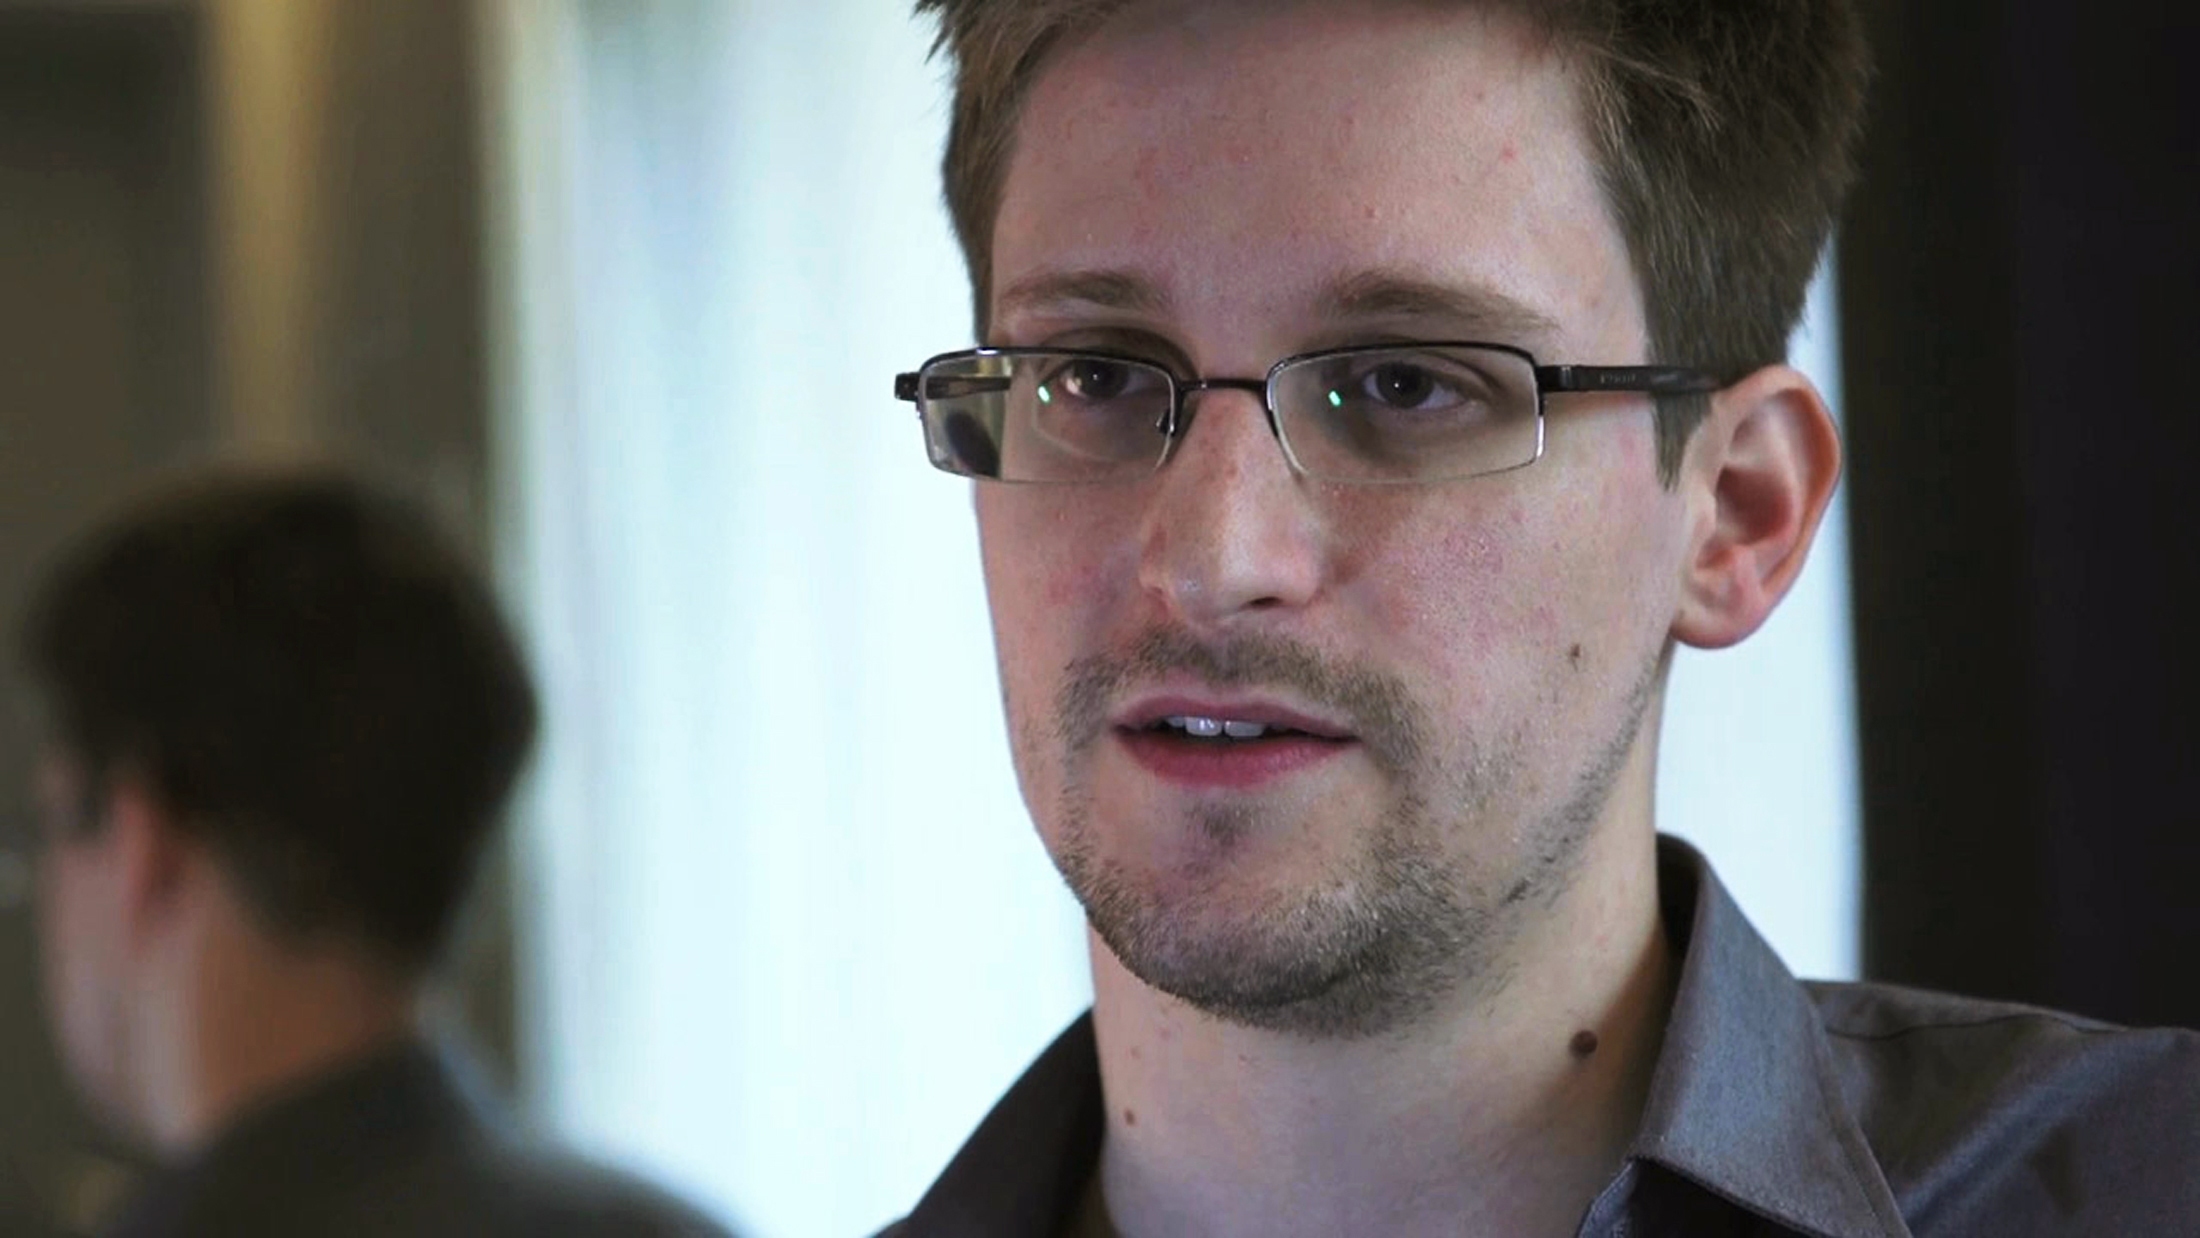 The revelations are the latest about apparent spying by US intelligence agencies to emerge from files leaked to the media by former NSA contractor Edward Snowden. Photo: Reuters